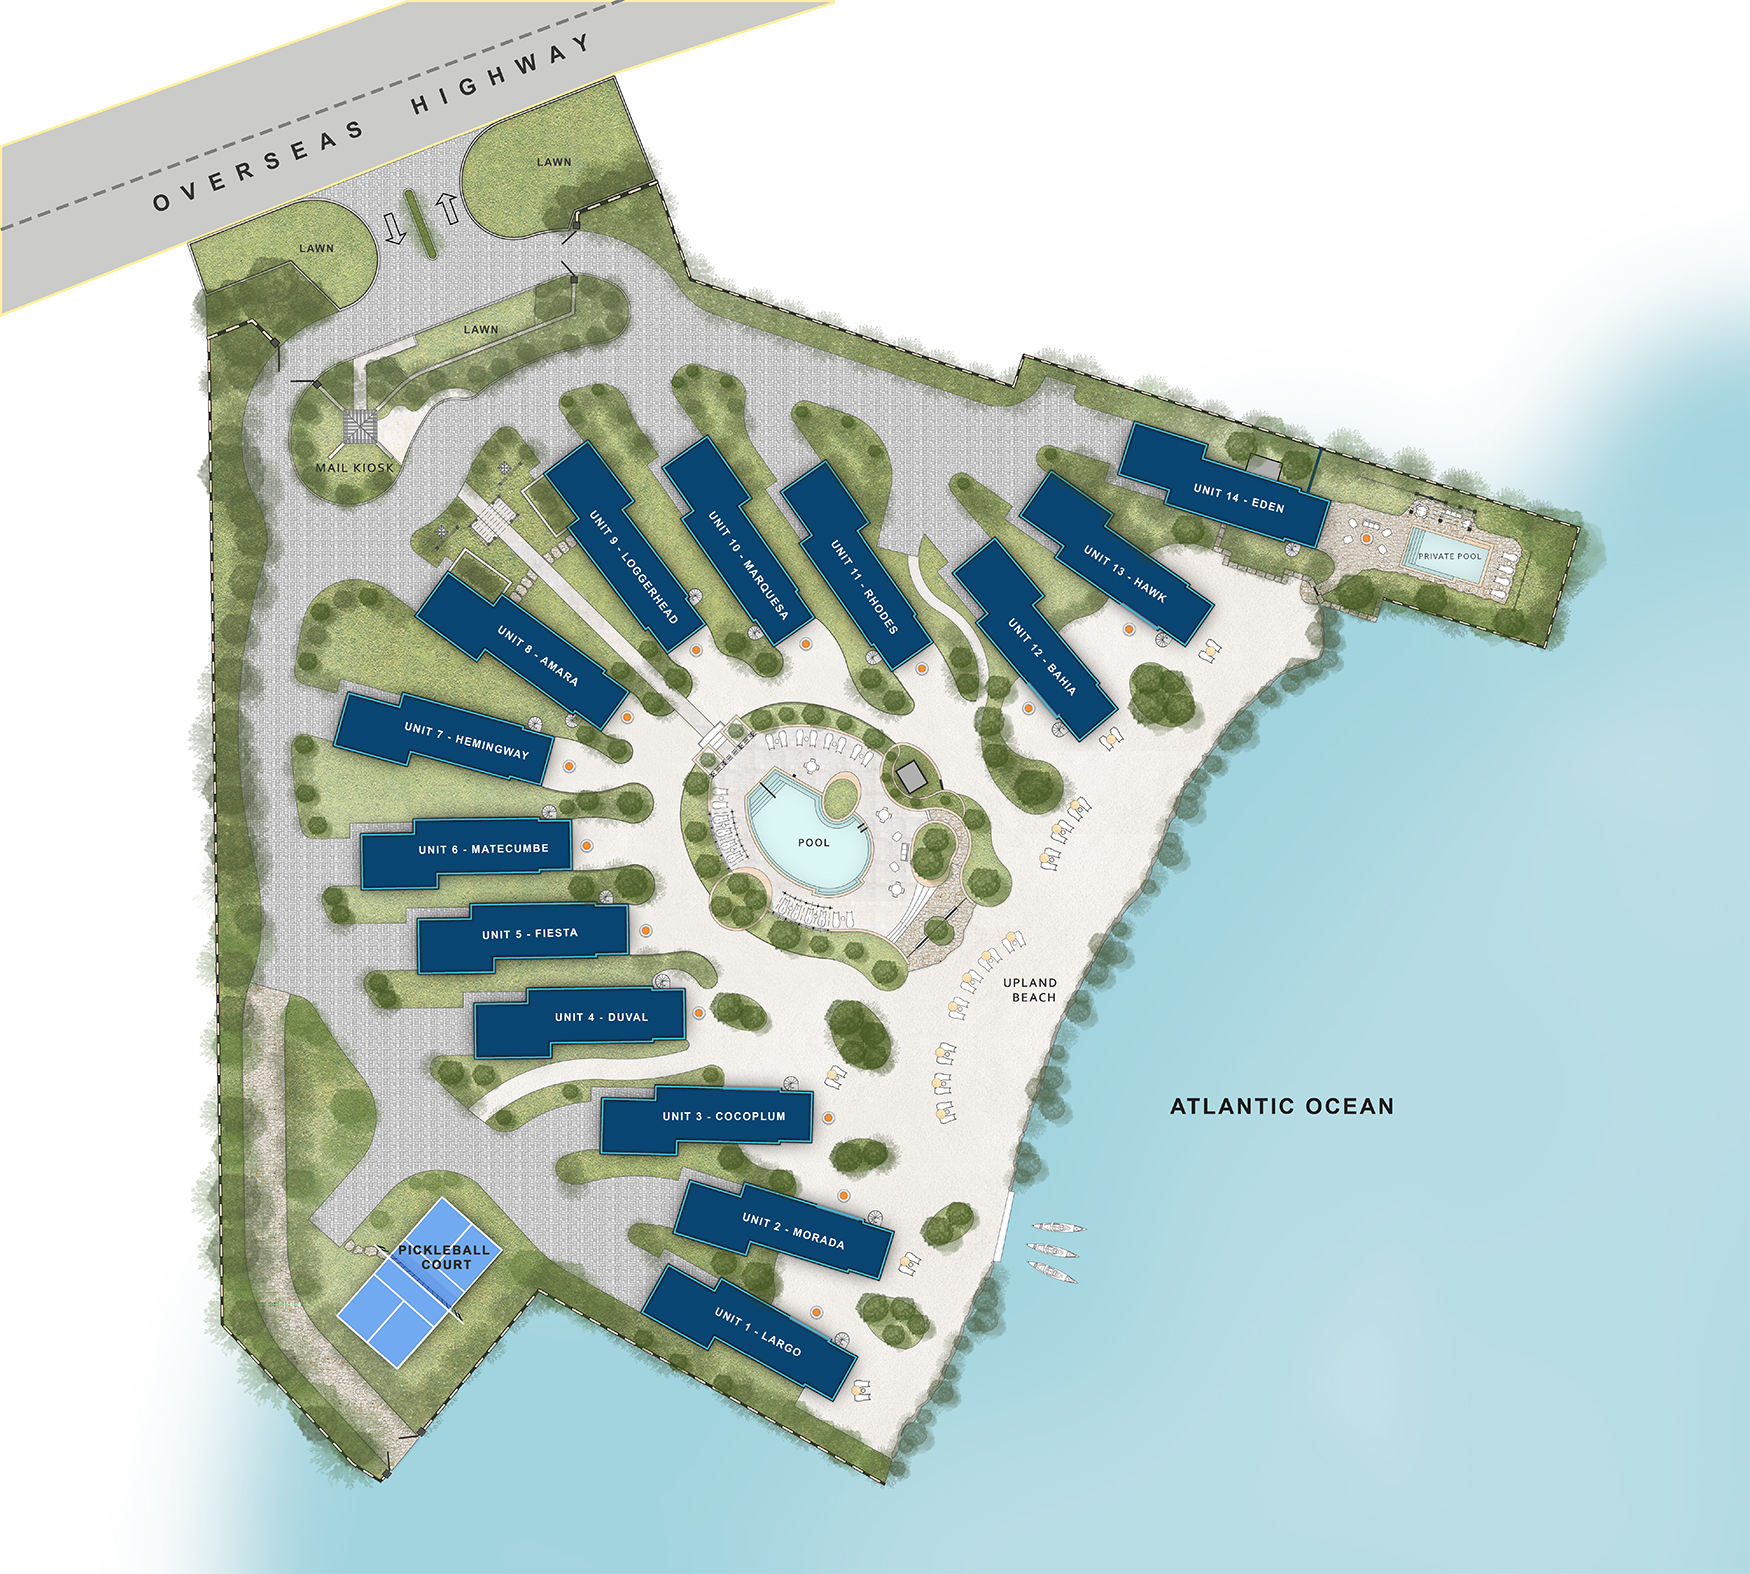 Site Map of SeaGlass Cove